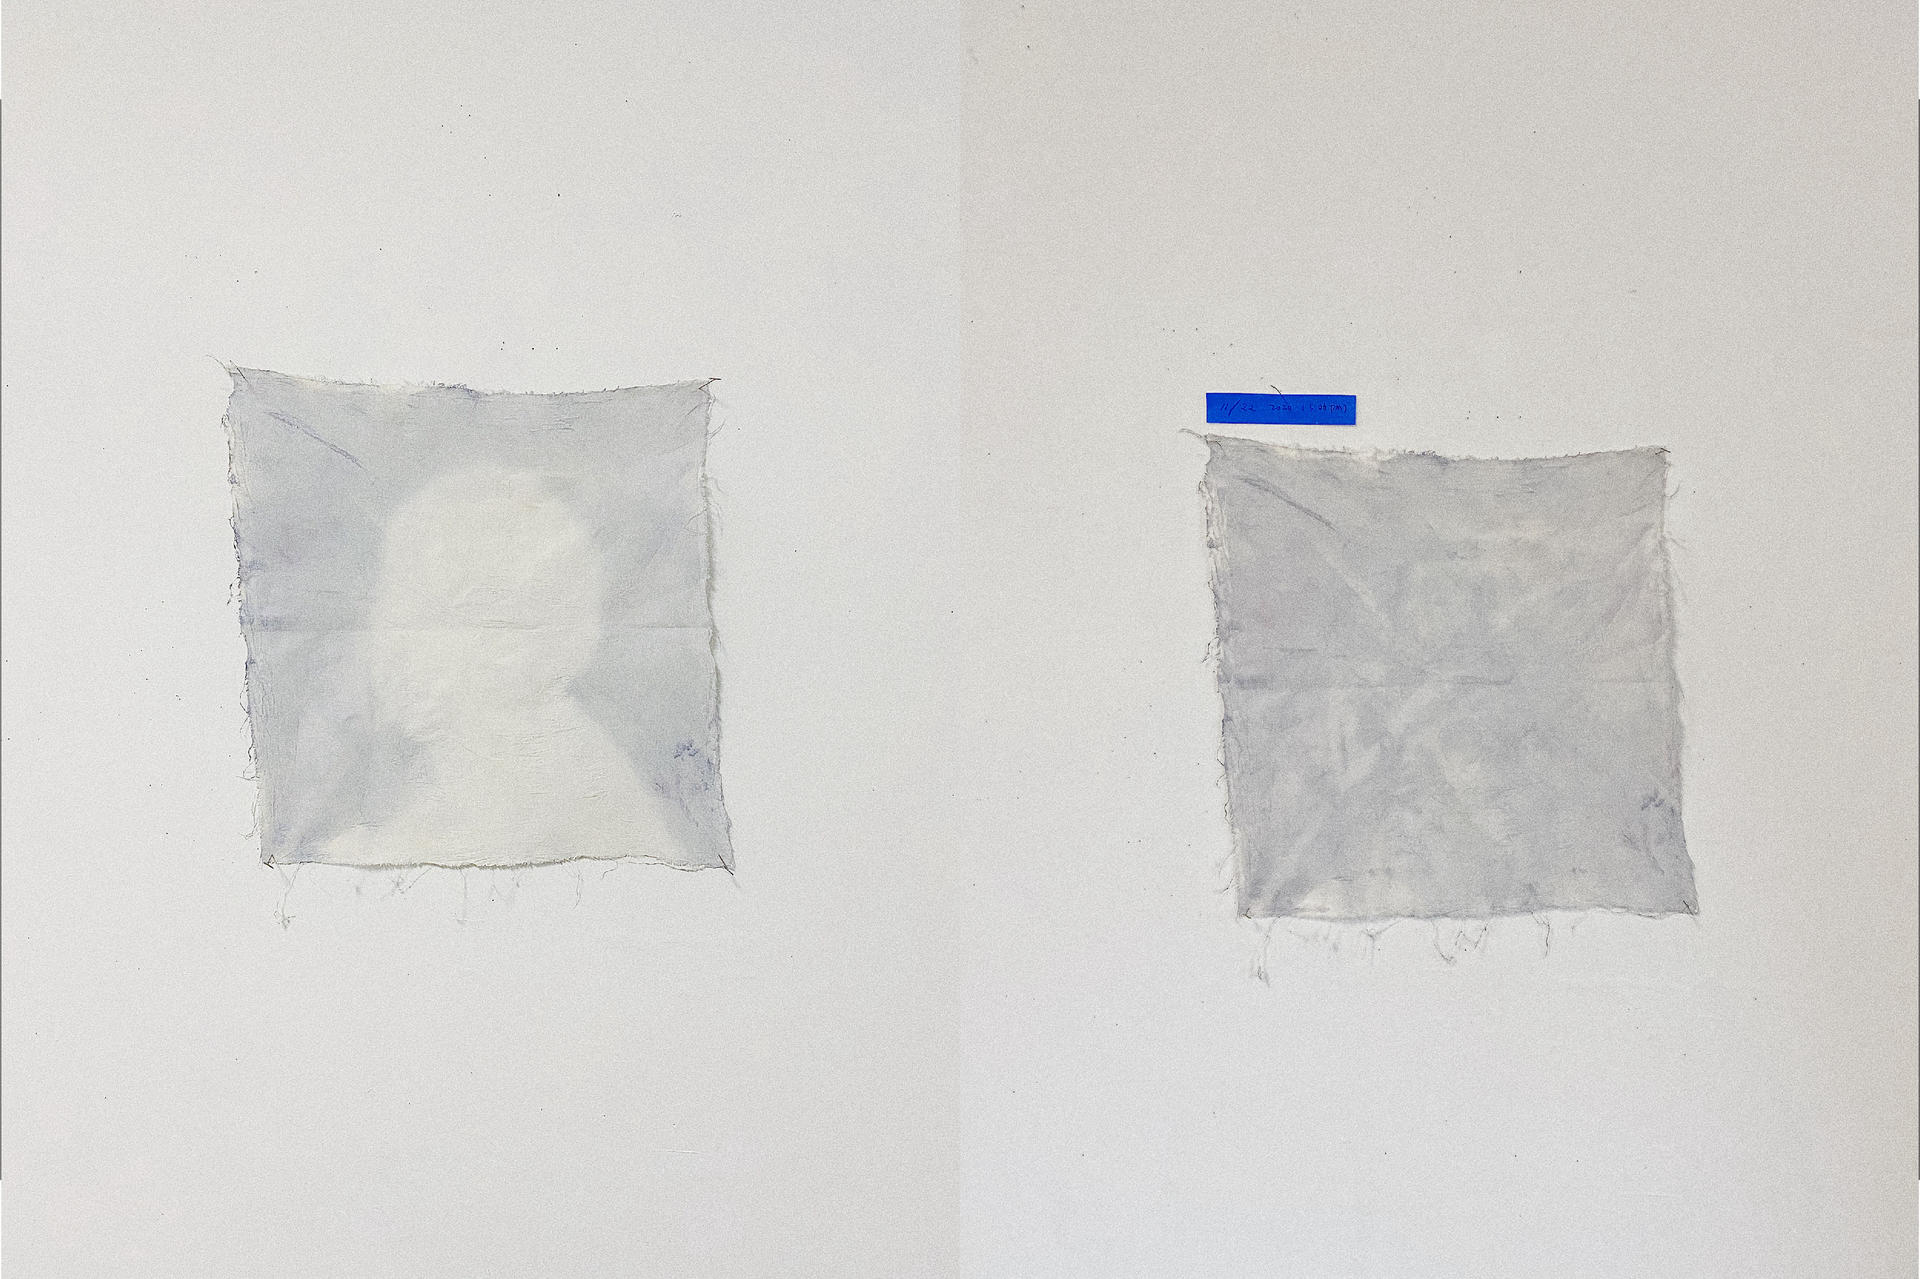 Two piece of blue tone cloth, Left one has a faded silhouette, right one appears to be solid.